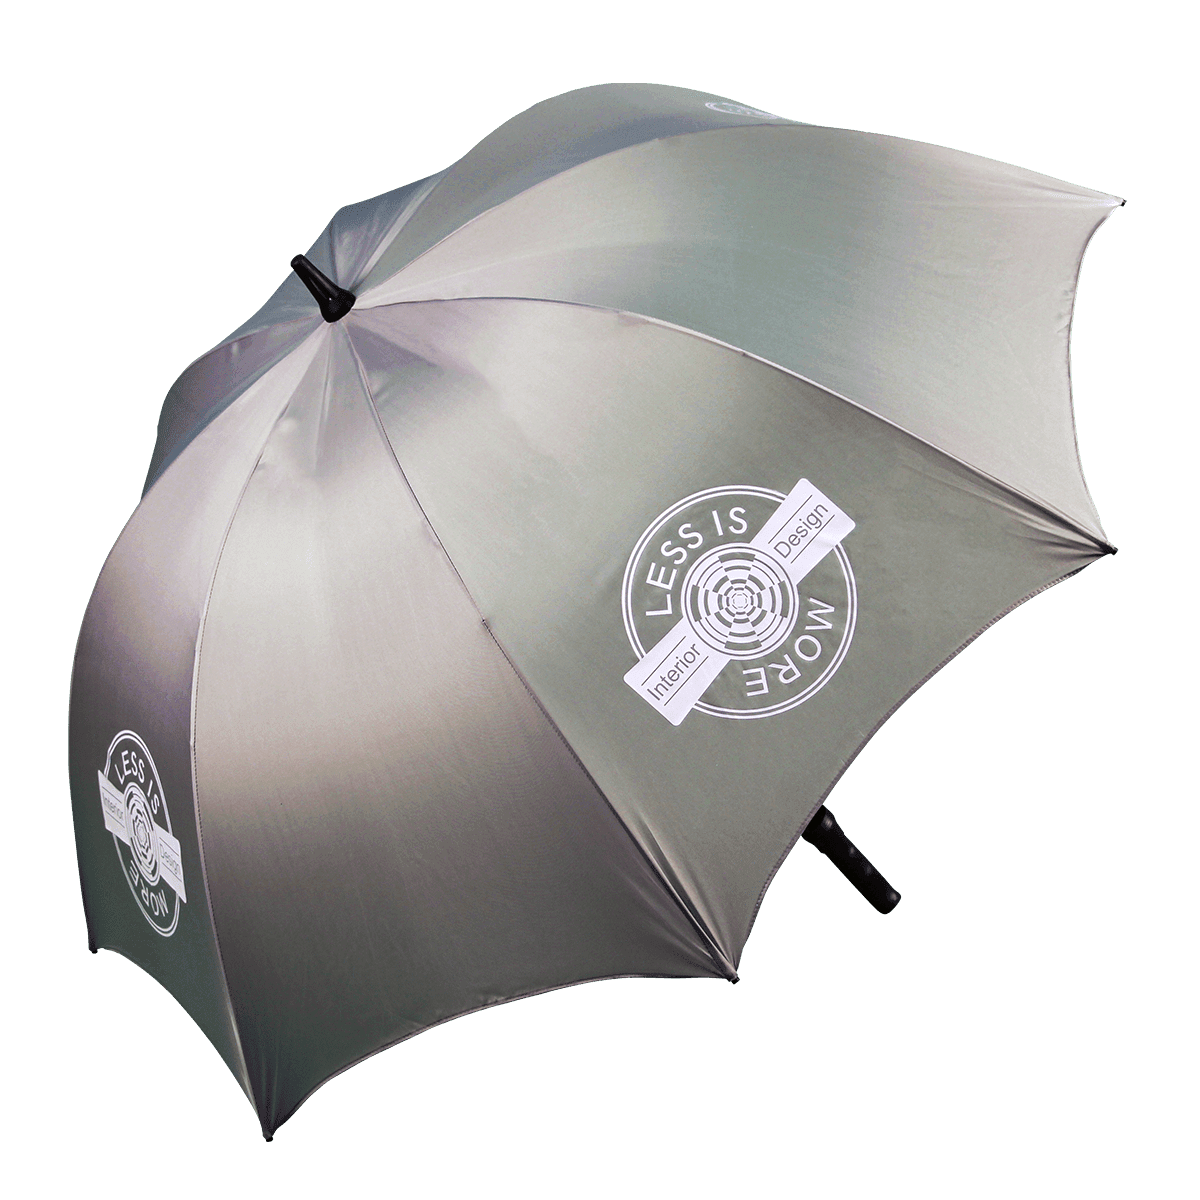 ProBrella Classic Umbrella Express - Promotions Only Group Limited